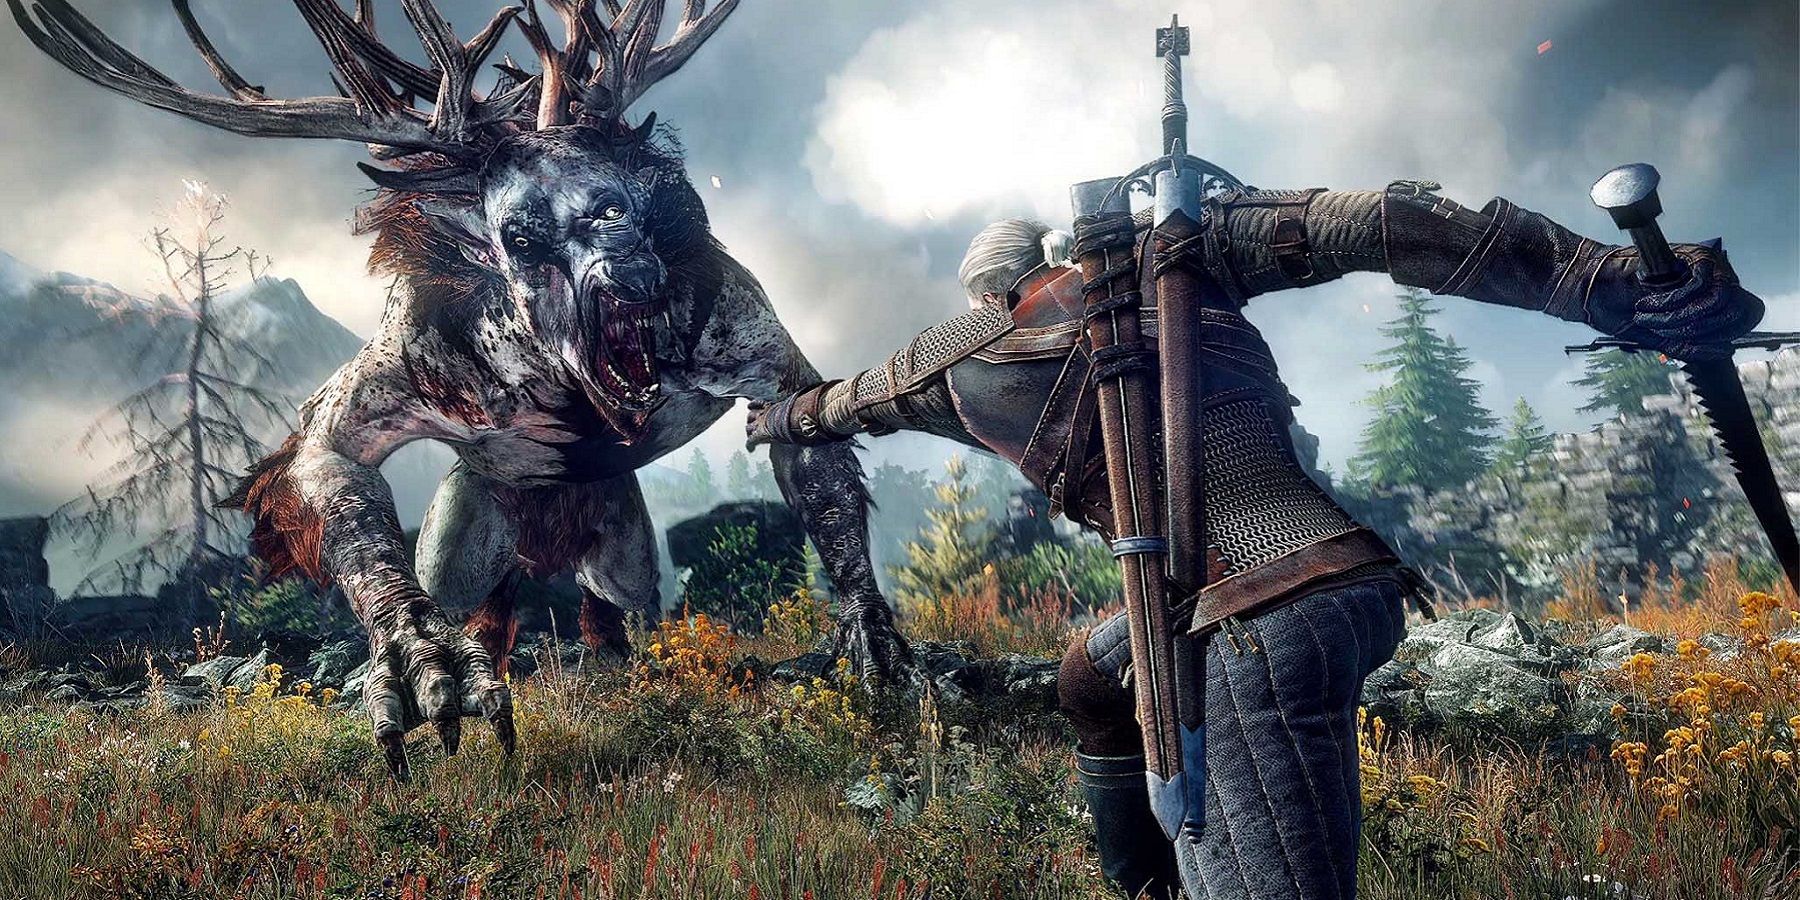 Screenshot from The Witcher 3 showing Geralt fighting a Fiend.